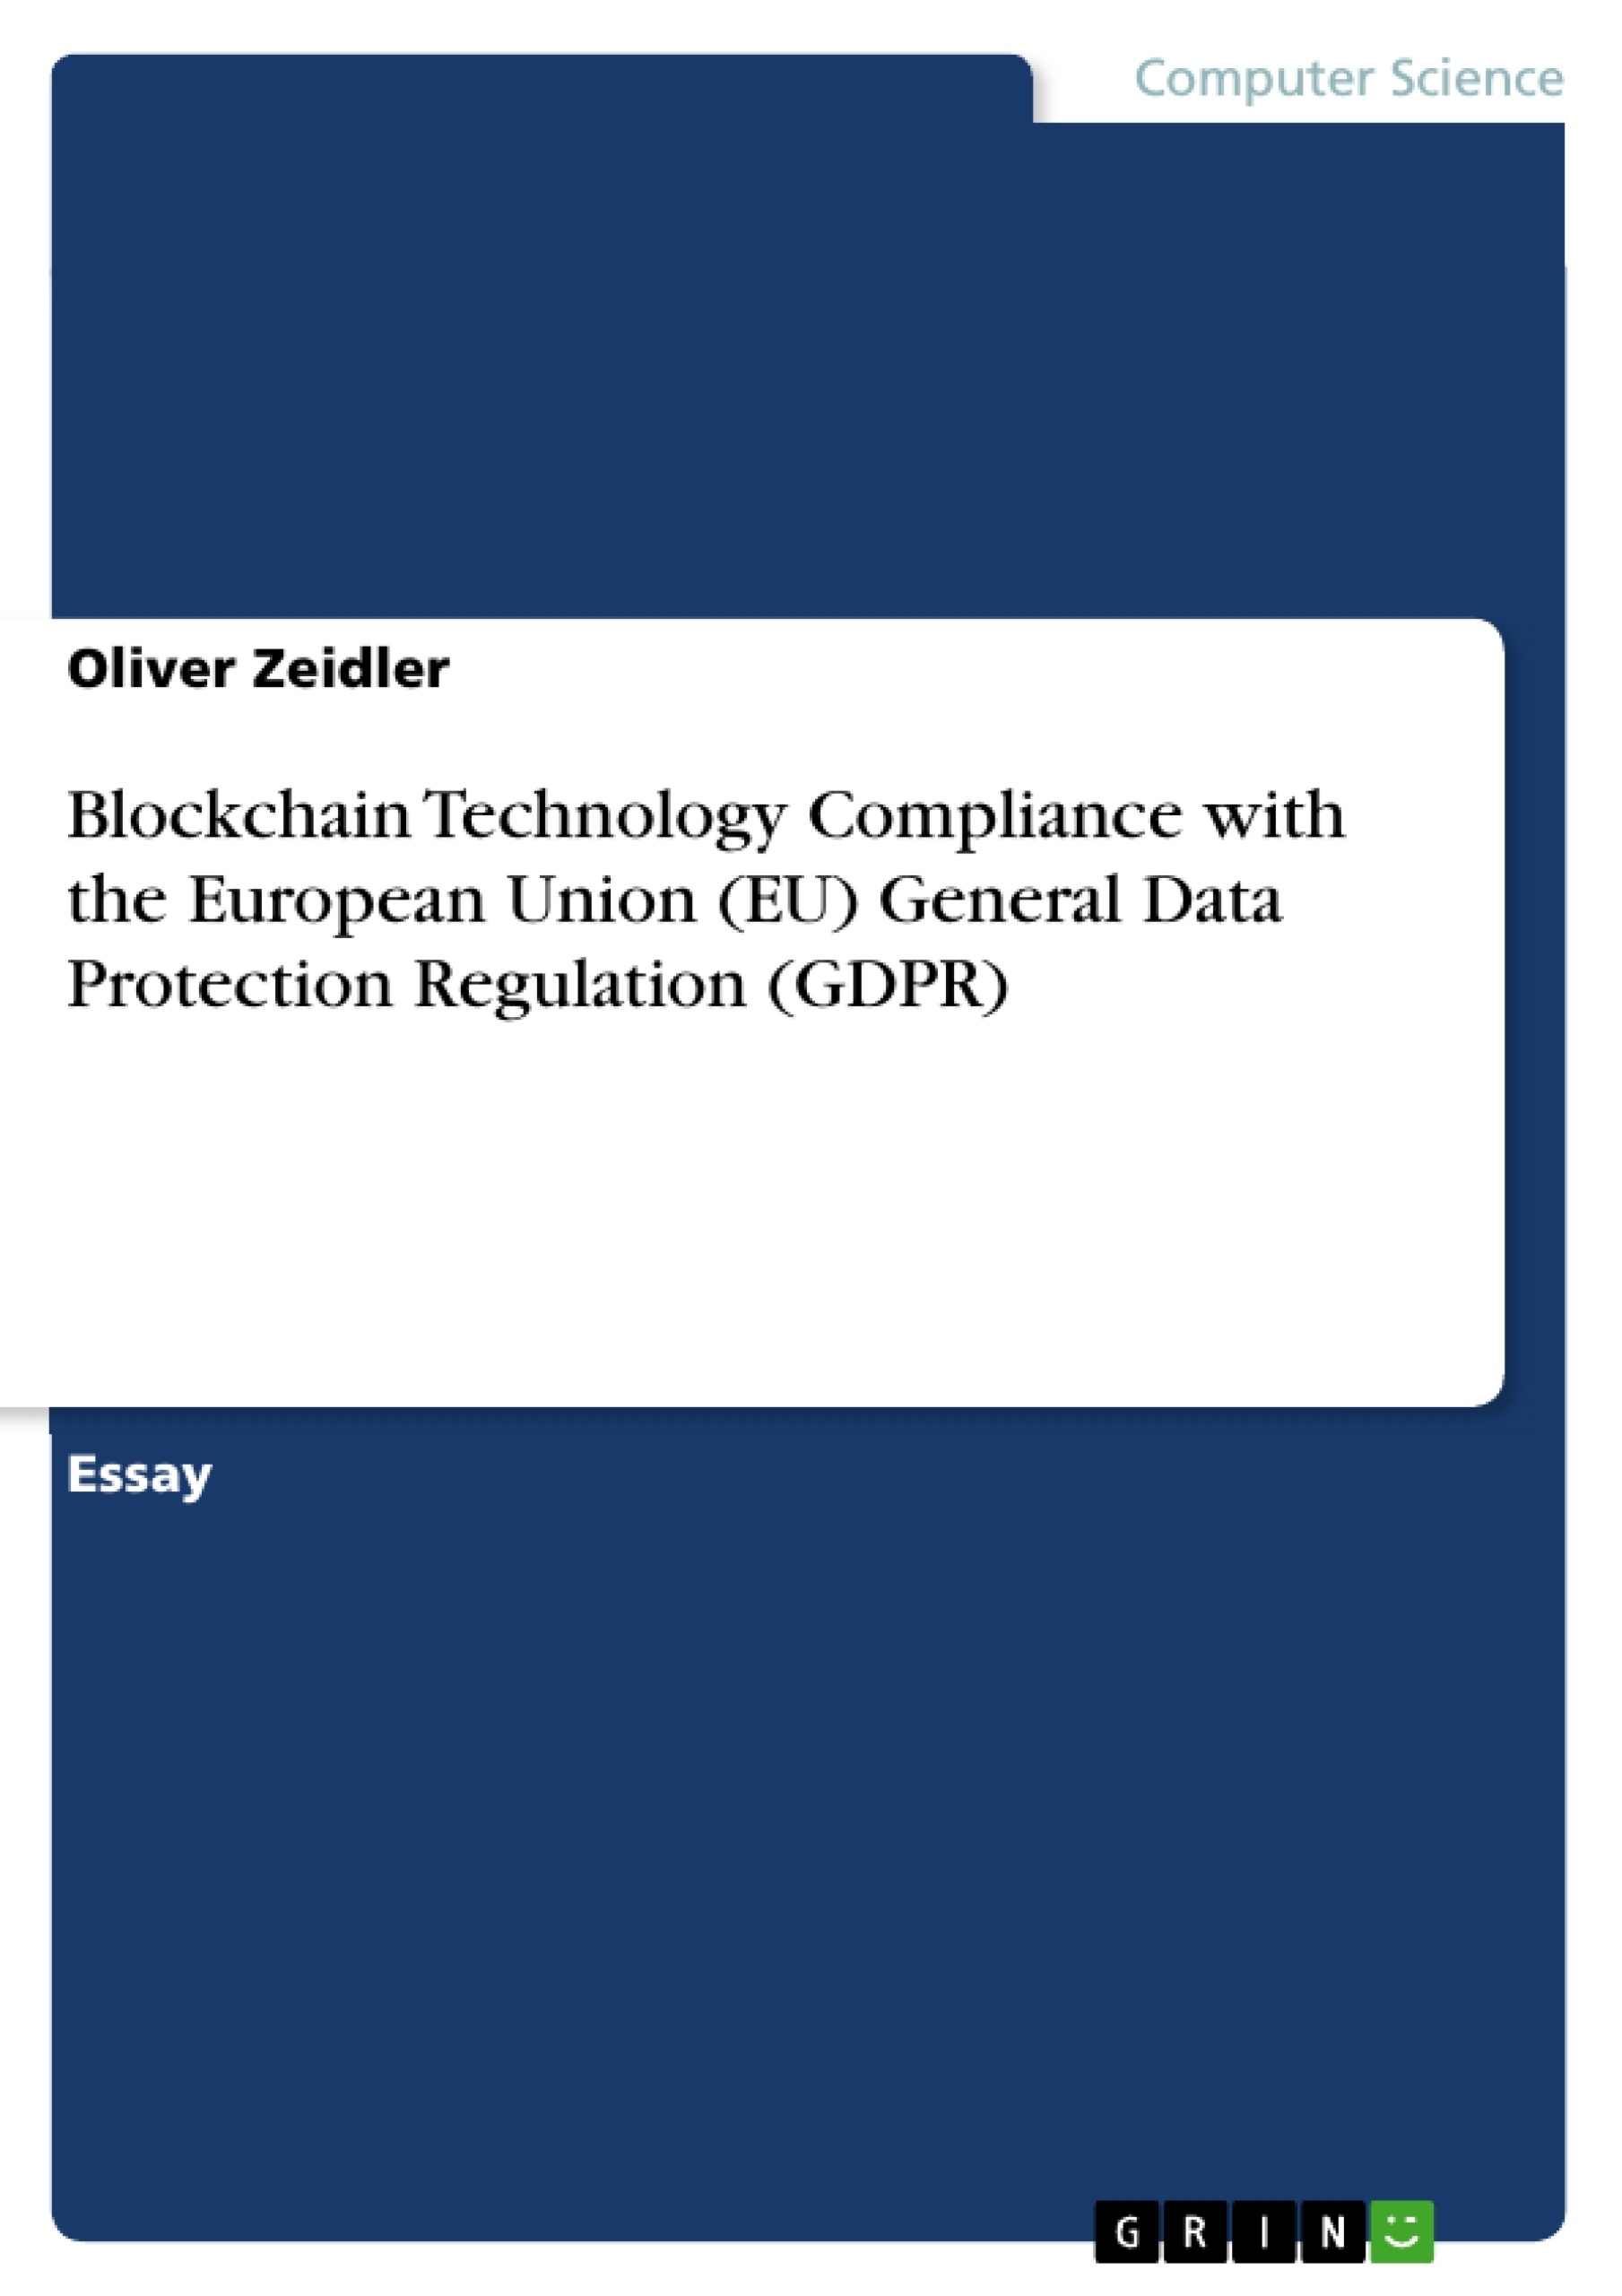 Title: Blockchain Technology Compliance with the European Union (EU) General Data Protection Regulation (GDPR)